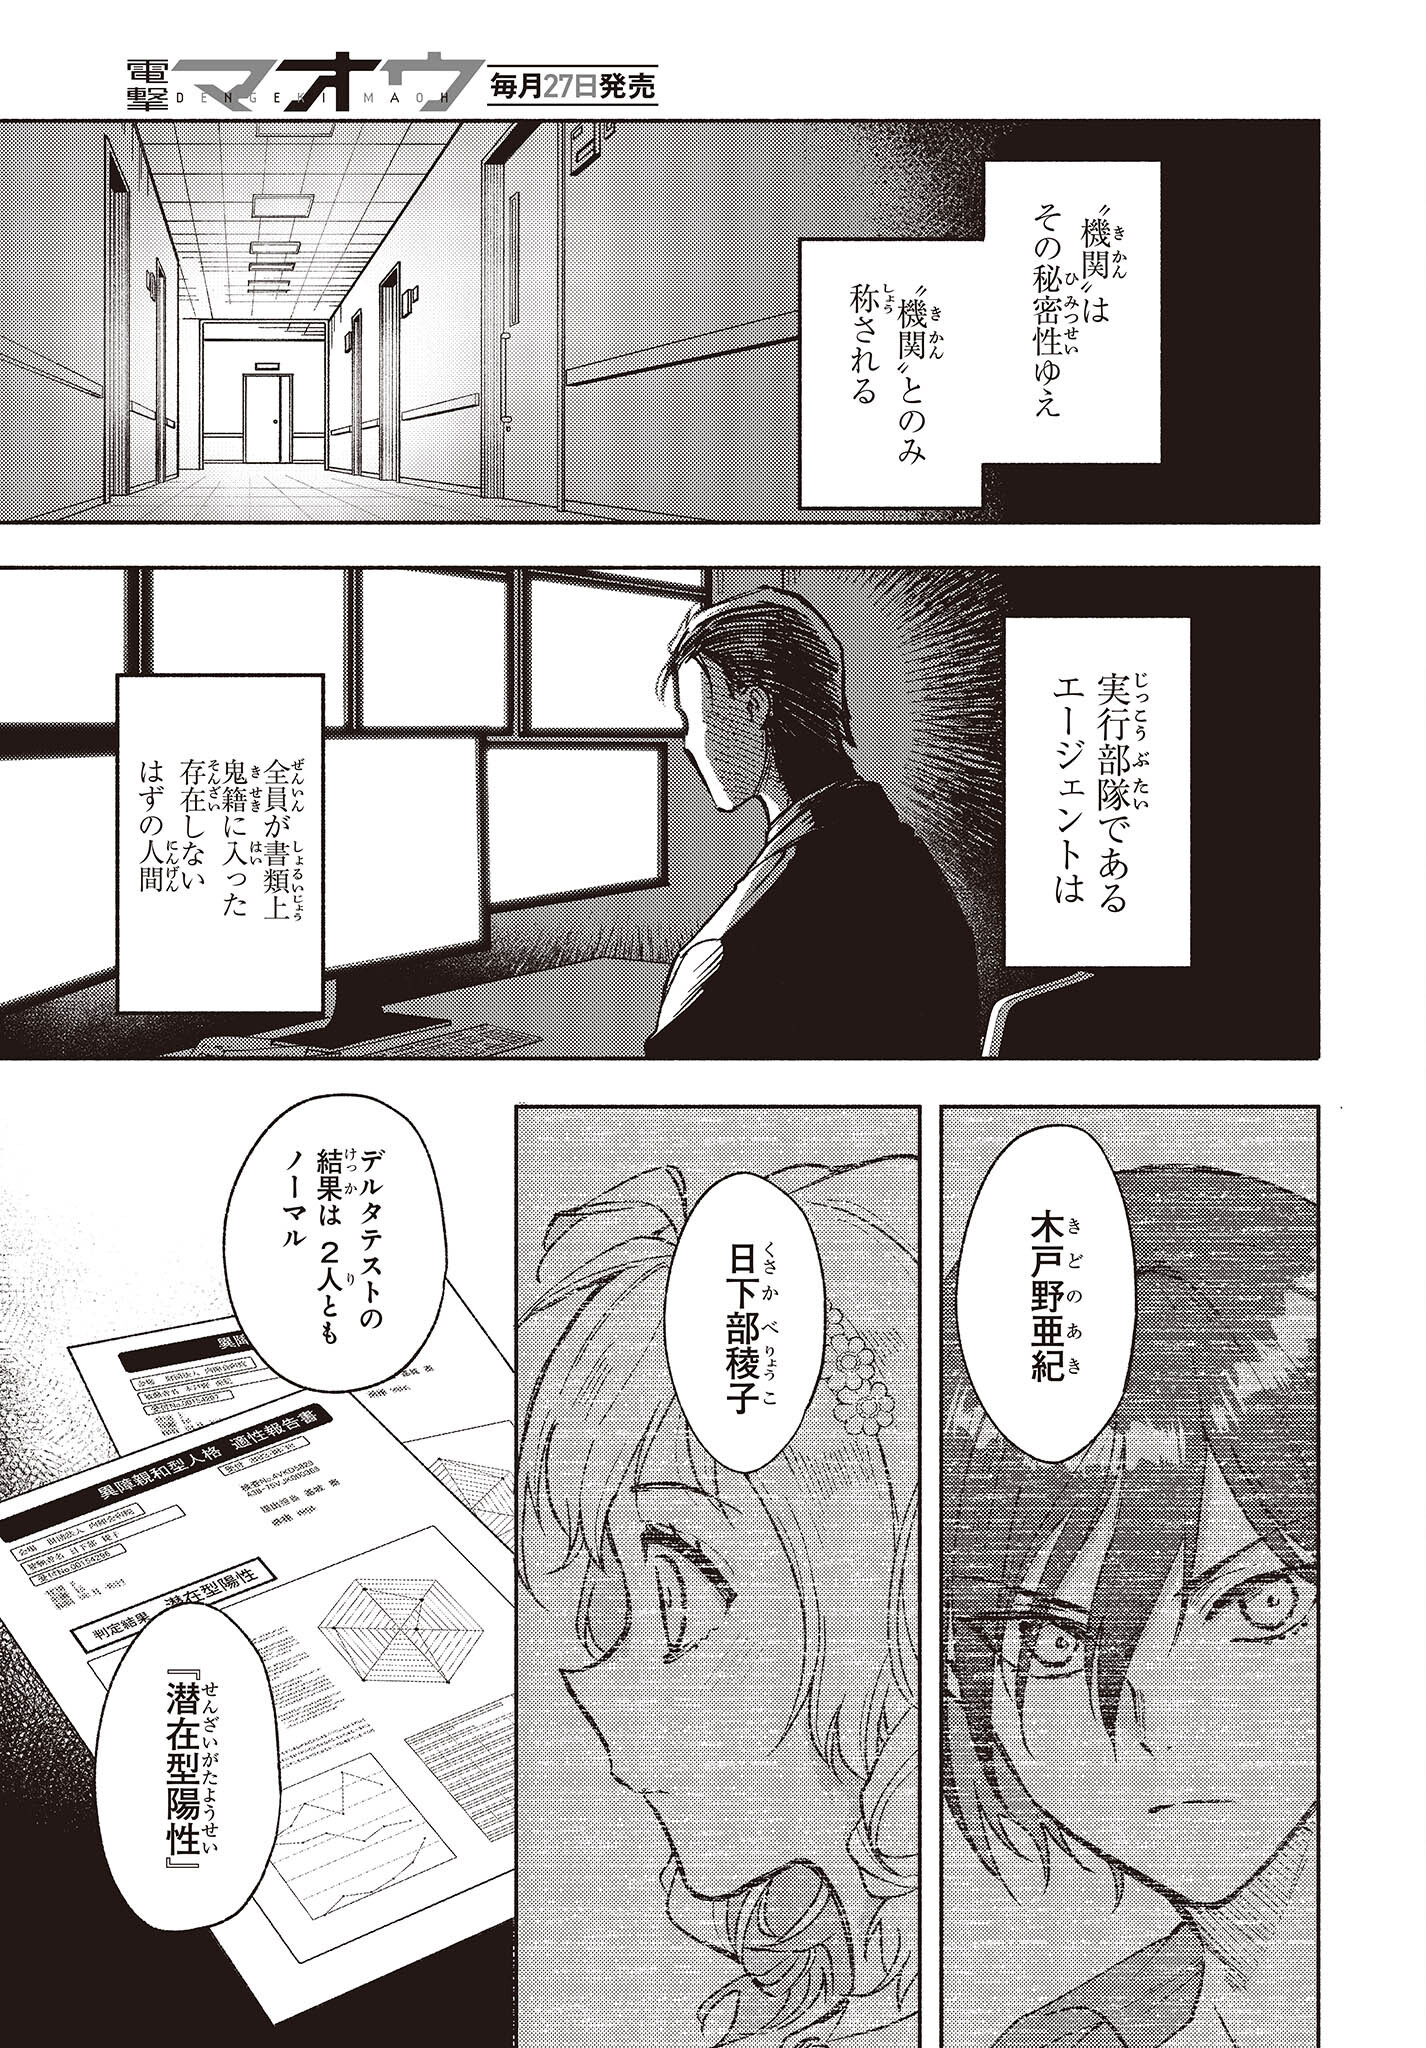 Missing 第6話 - Page 3